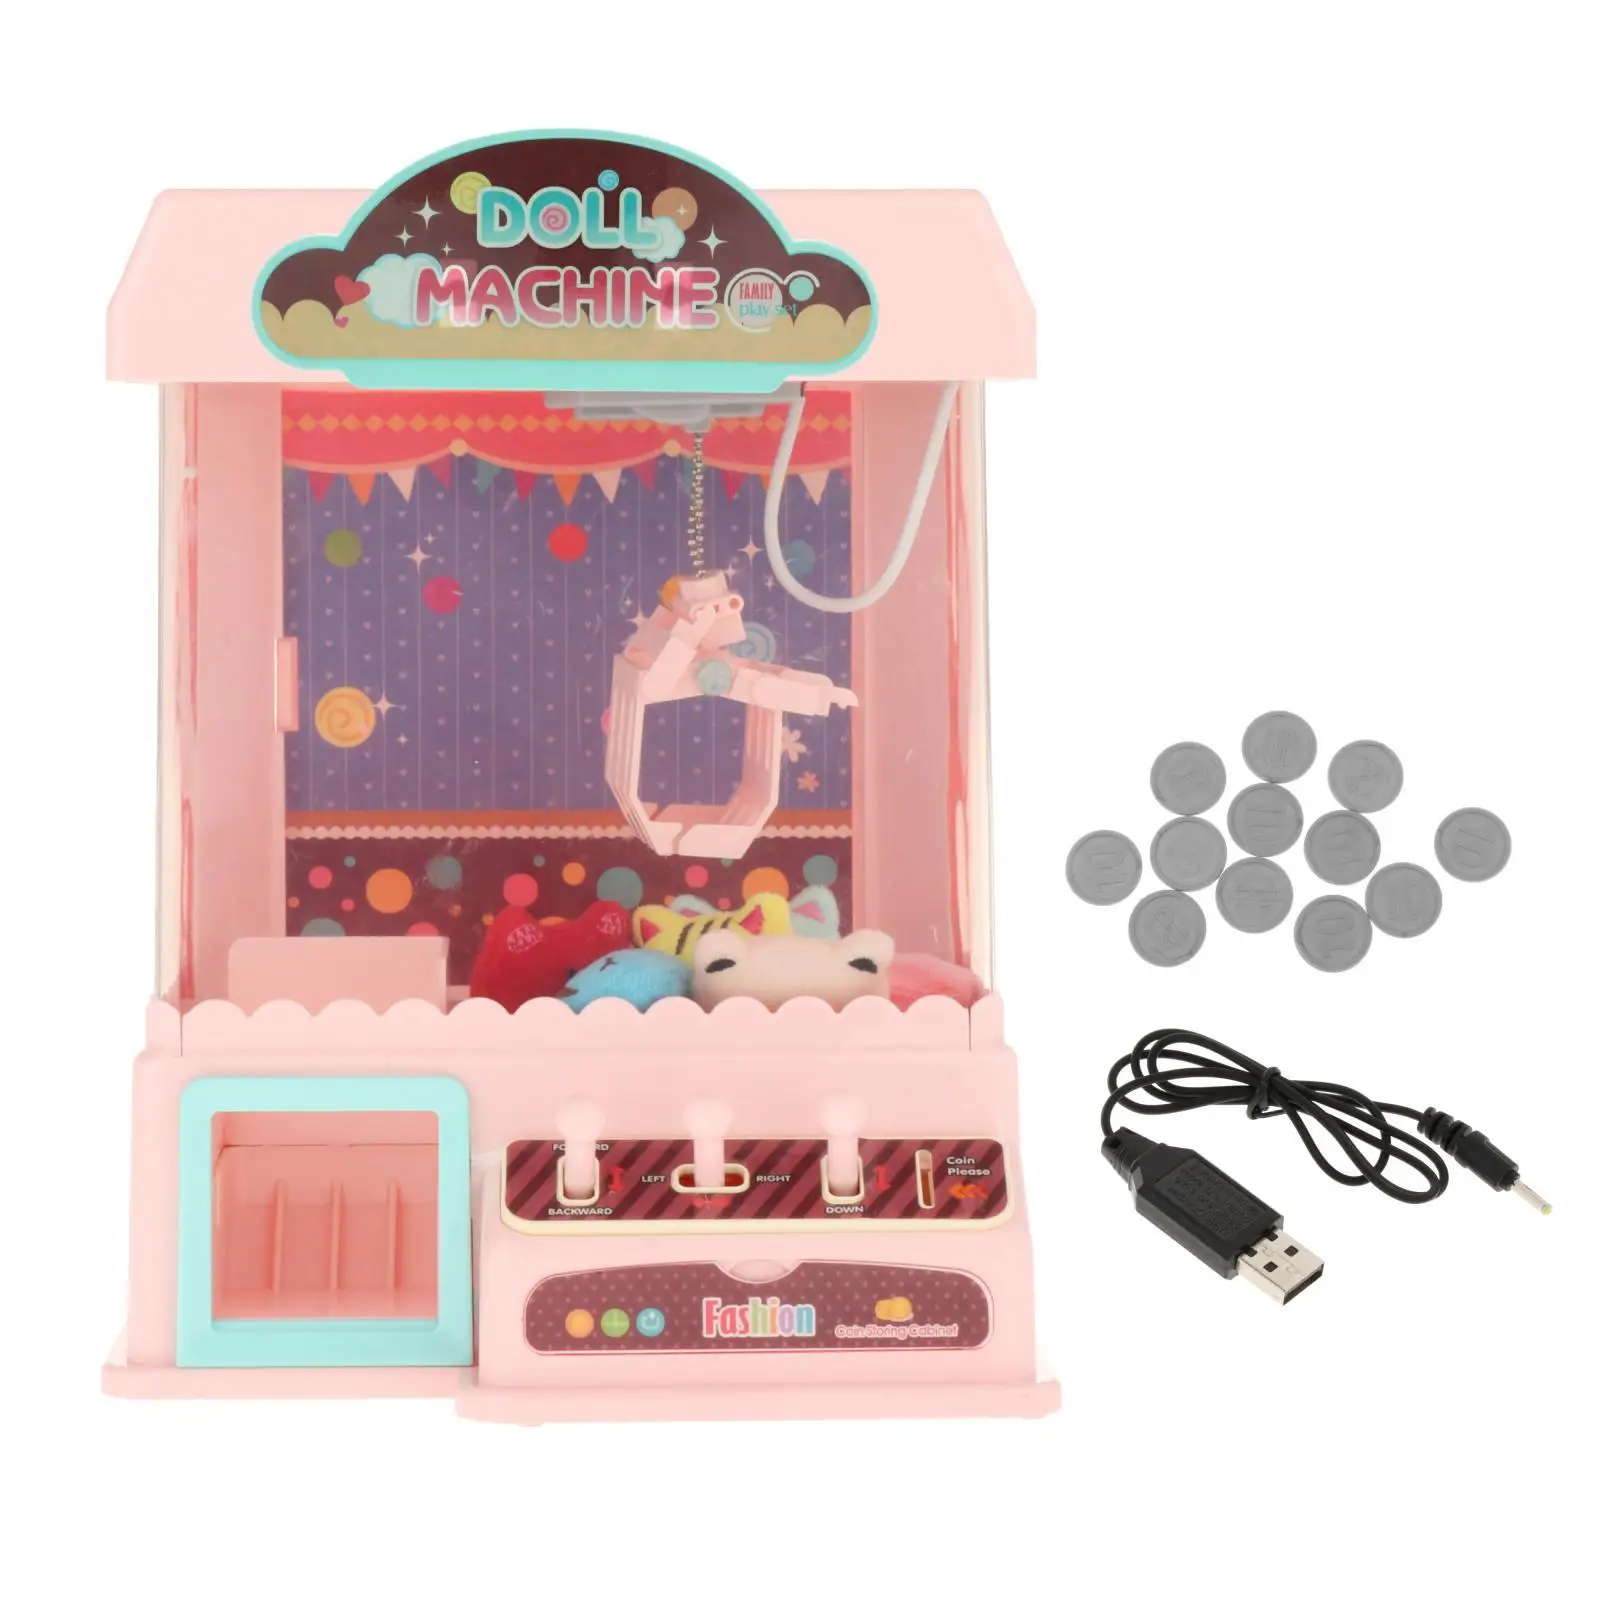 Rechargeable Claw Machine with 6 Dolls and 10 Capsules Girl Grab Doll Clip Arcade Machine for Kids Children Birthday Gifts